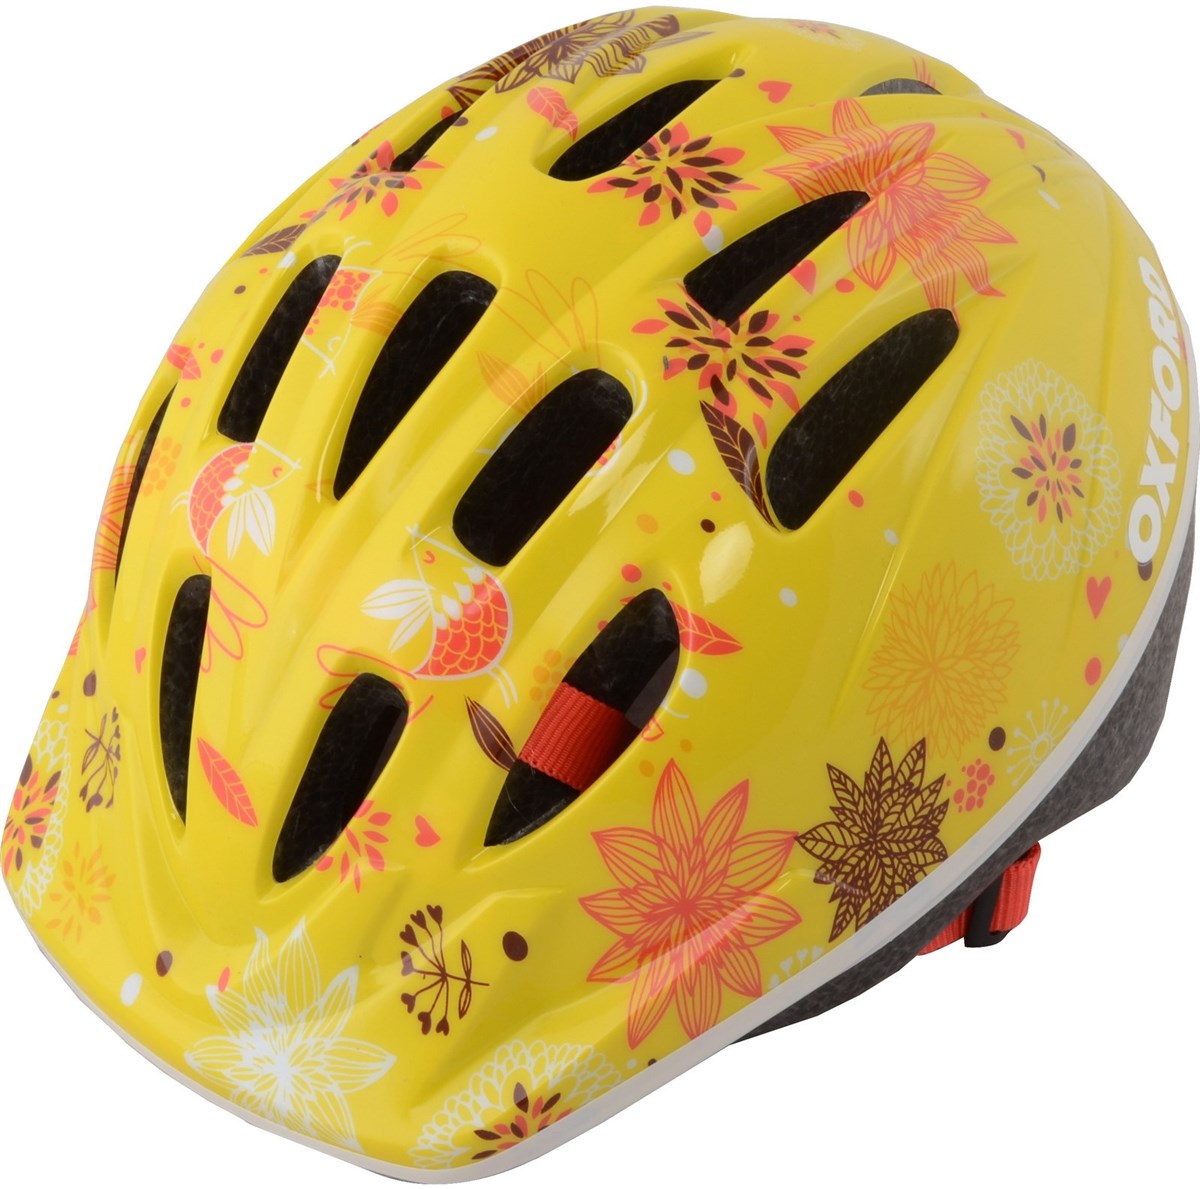 Oxford Junior Cycling Helmet 2016 product image